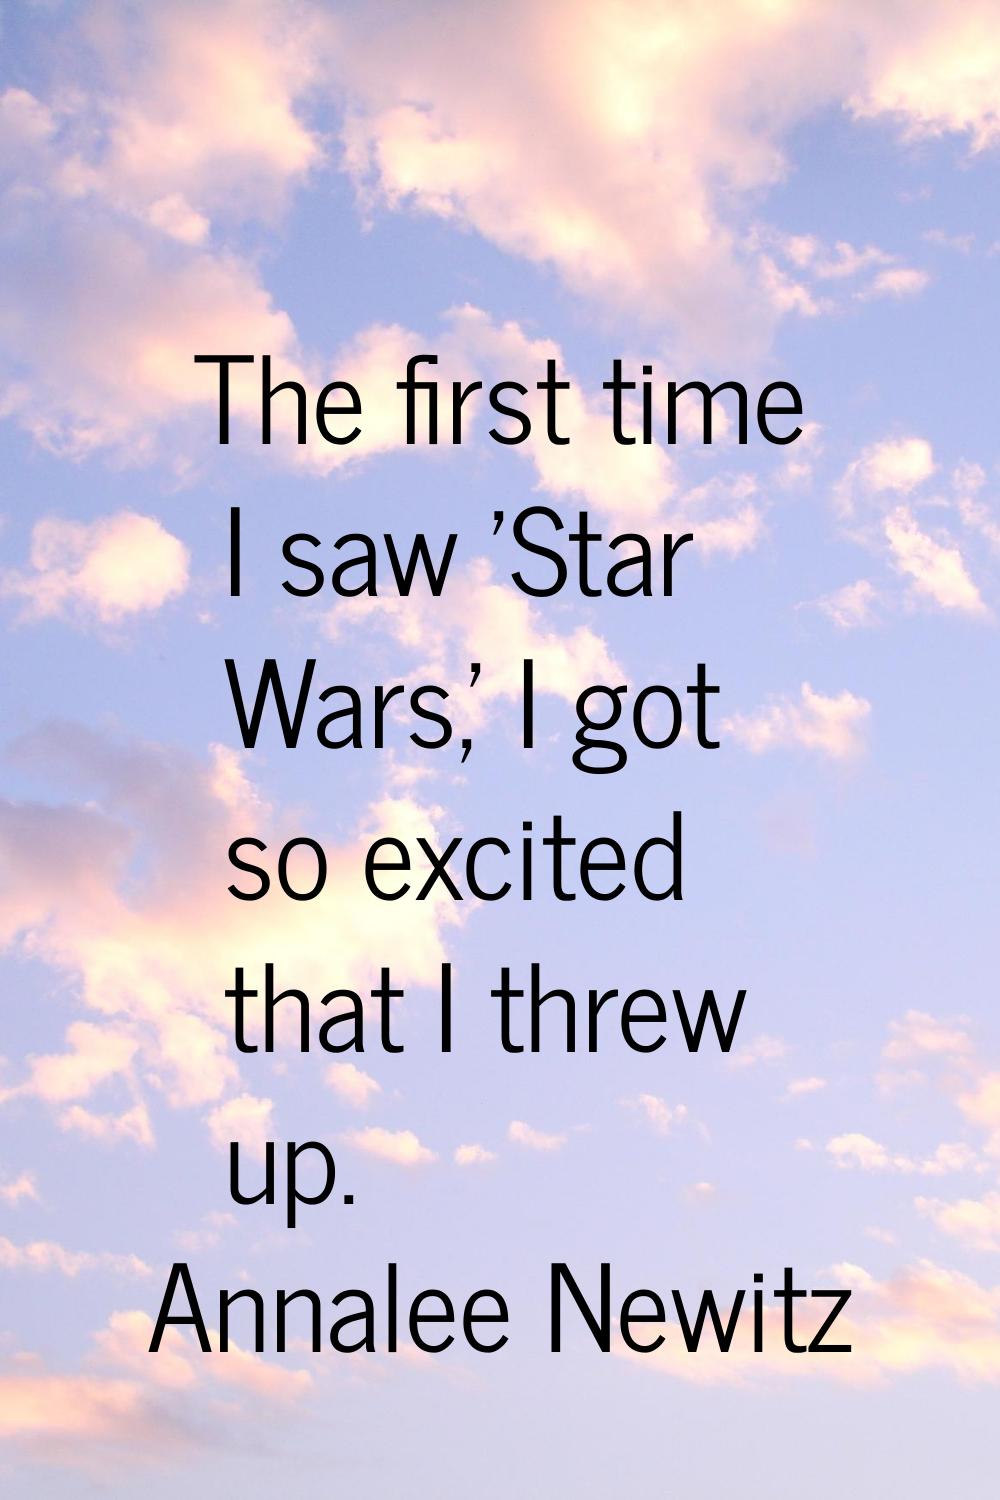 The first time I saw 'Star Wars,' I got so excited that I threw up.